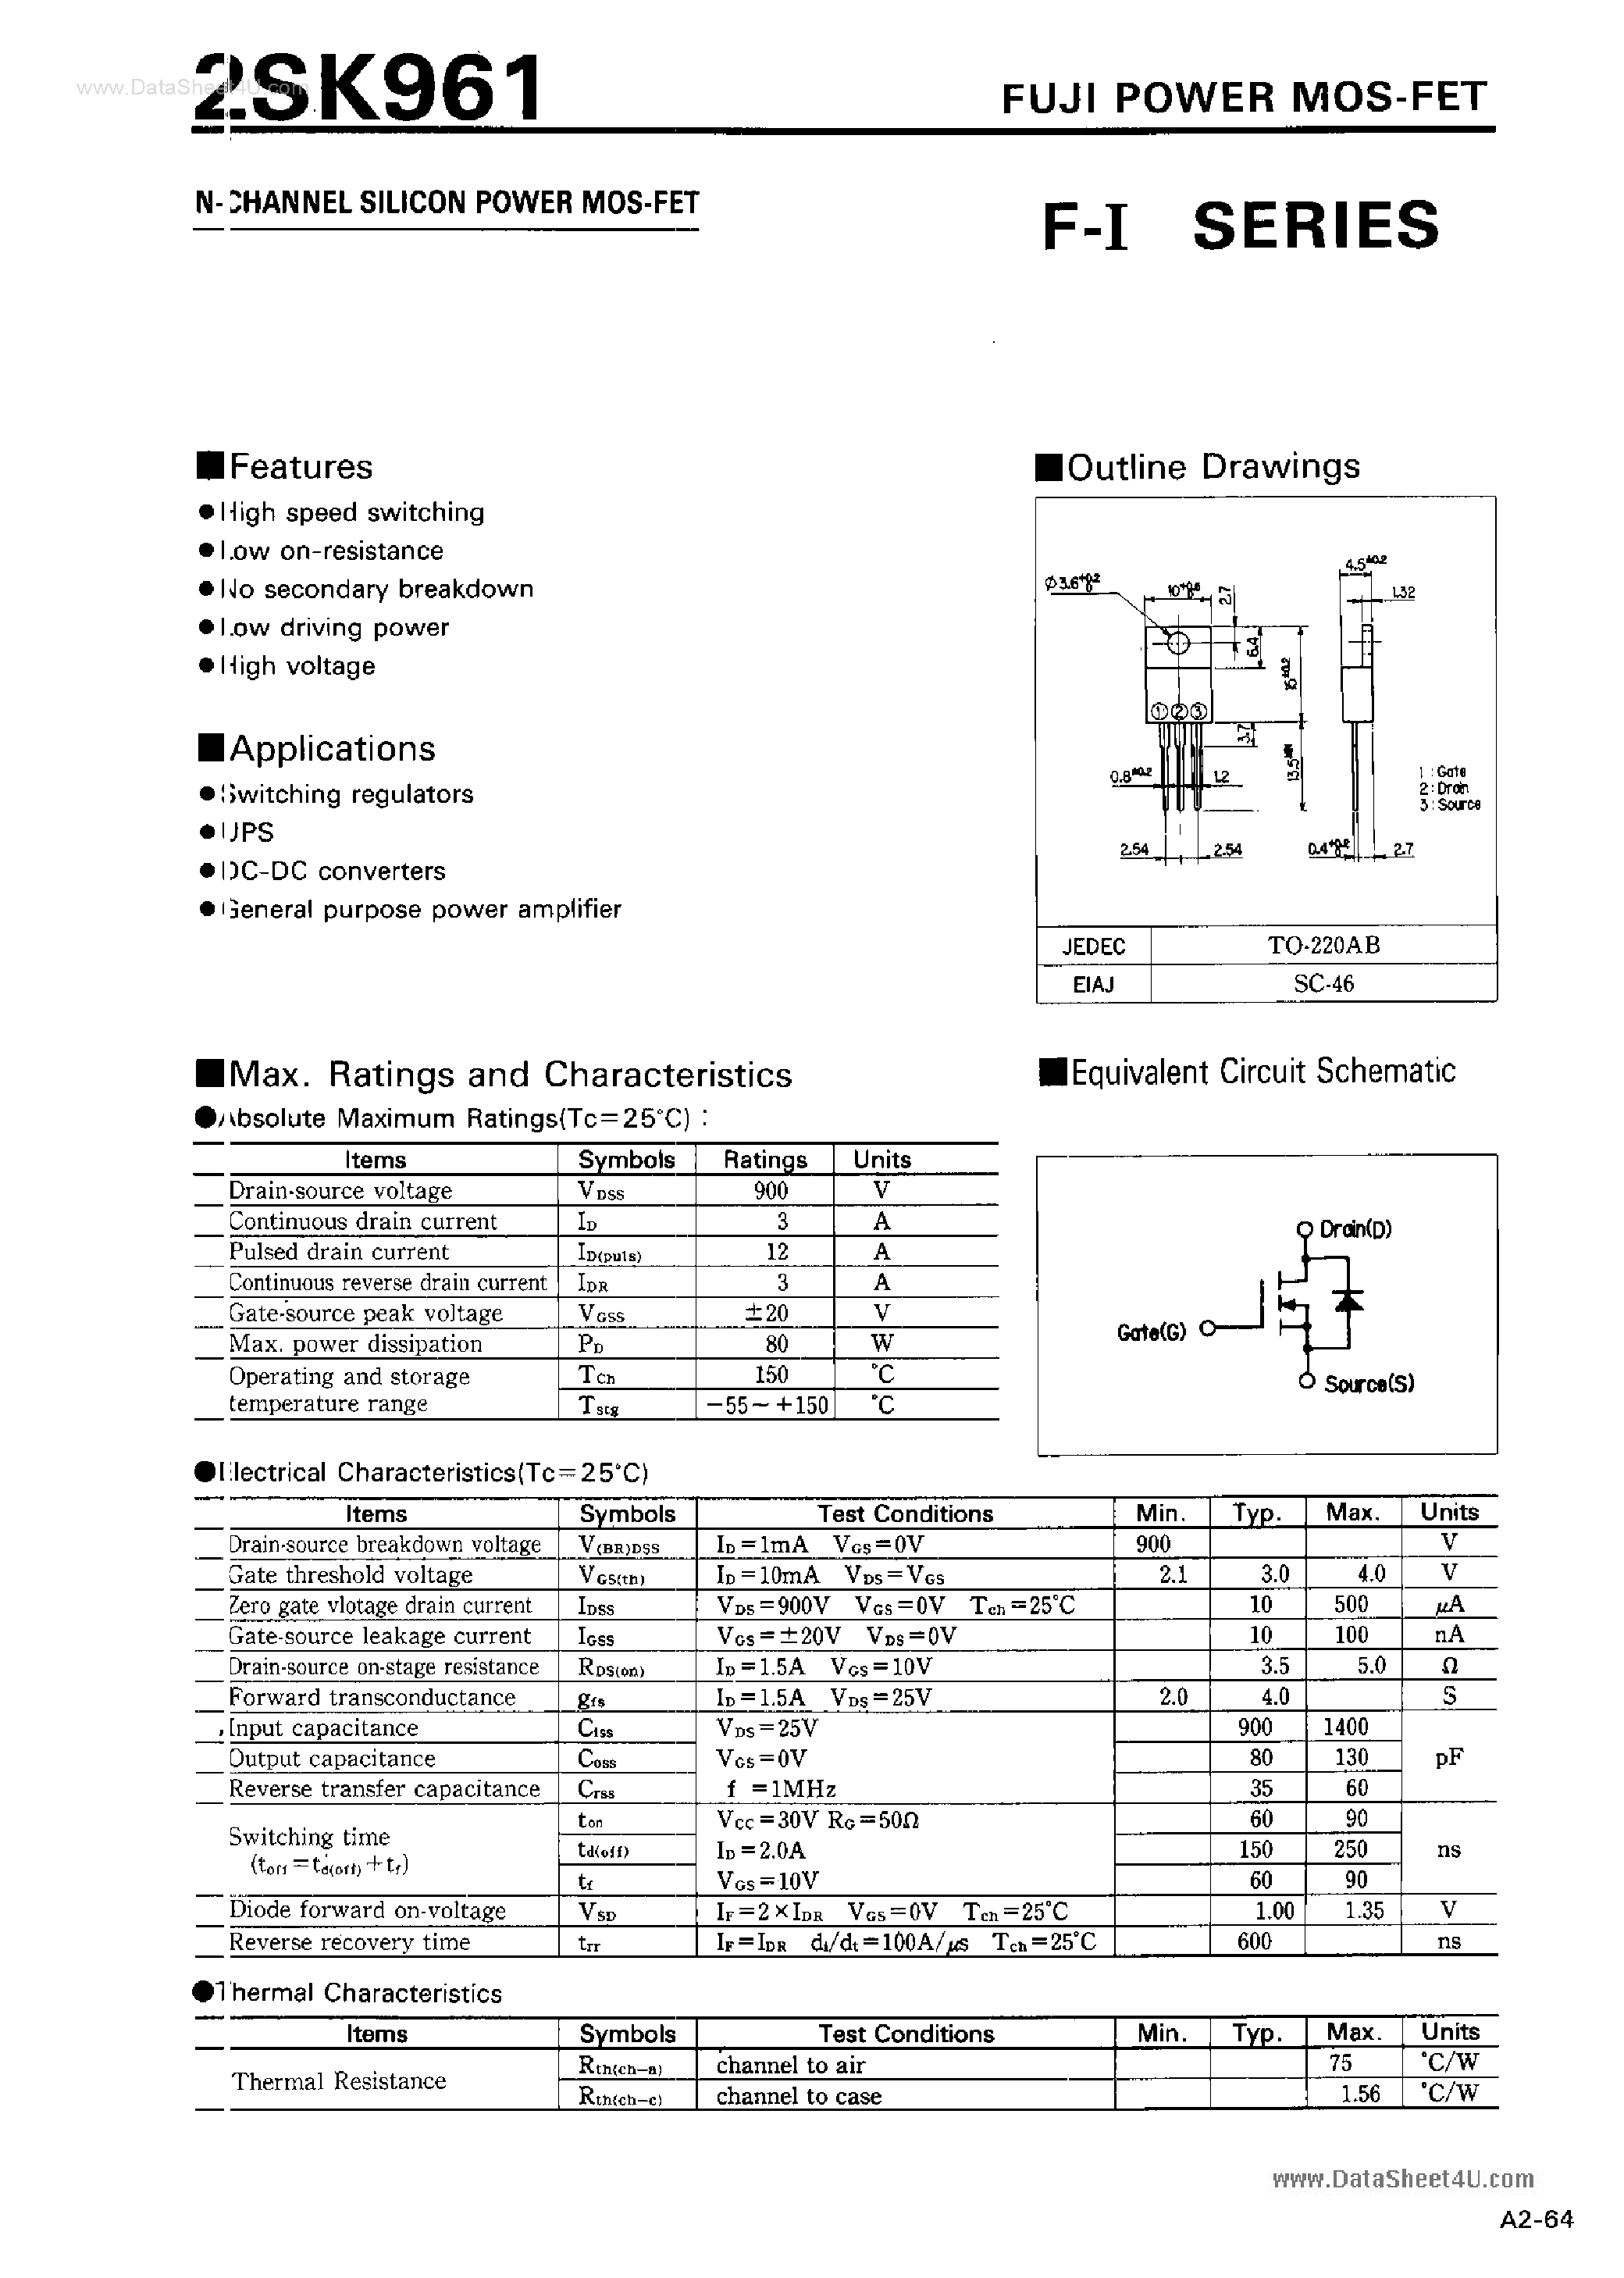 Datasheet K961 - Search -----> 2SK961 page 1